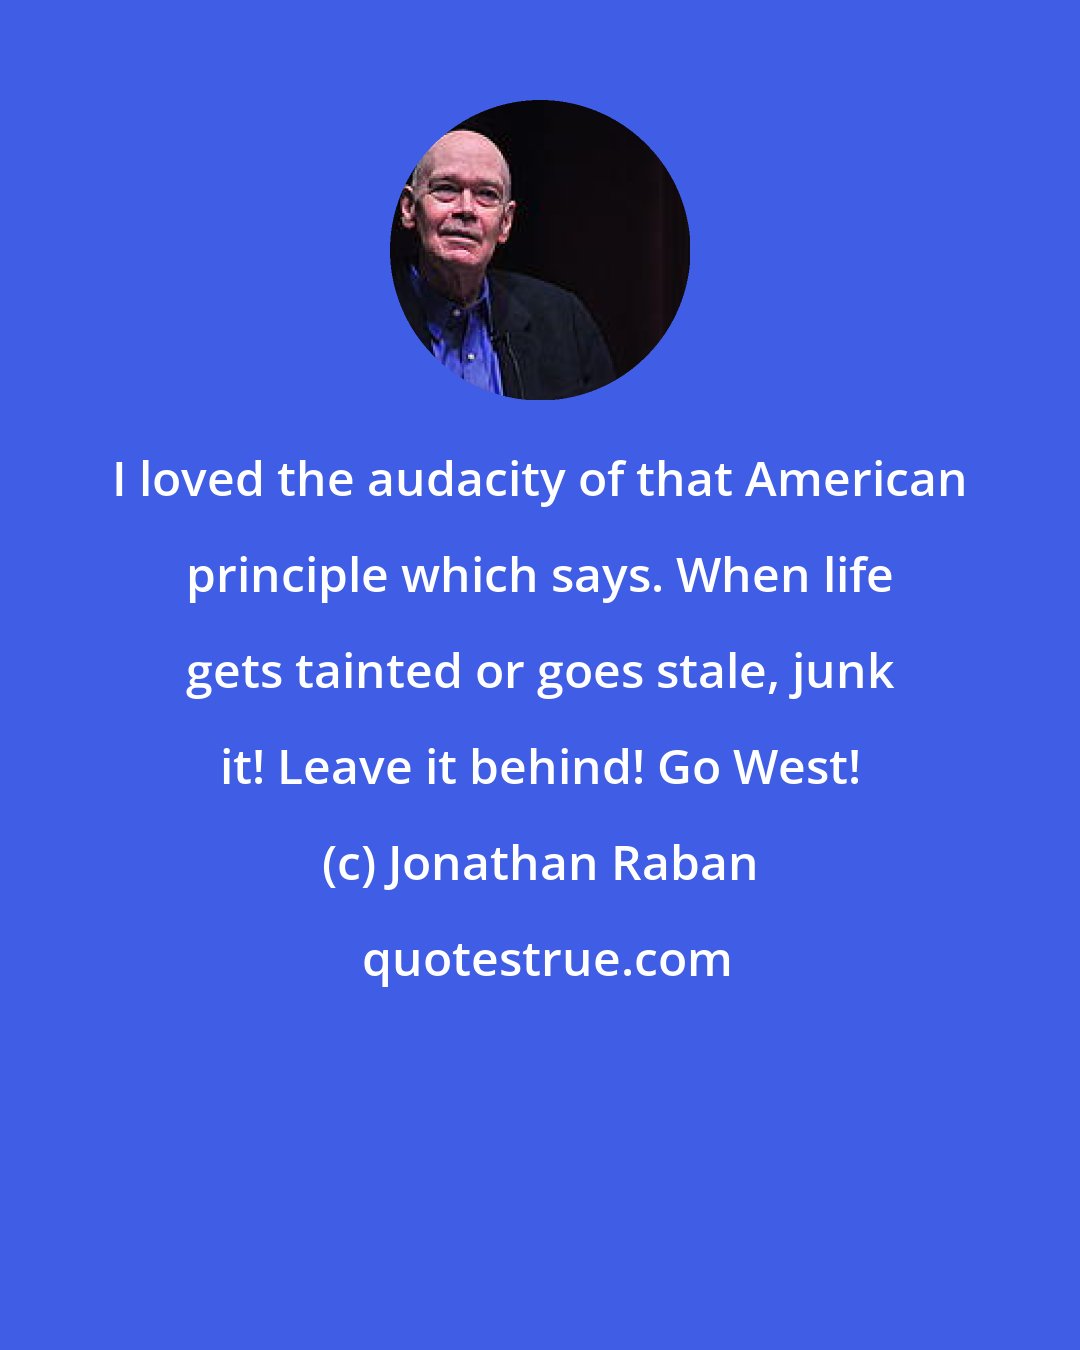 Jonathan Raban: I loved the audacity of that American principle which says. When life gets tainted or goes stale, junk it! Leave it behind! Go West!